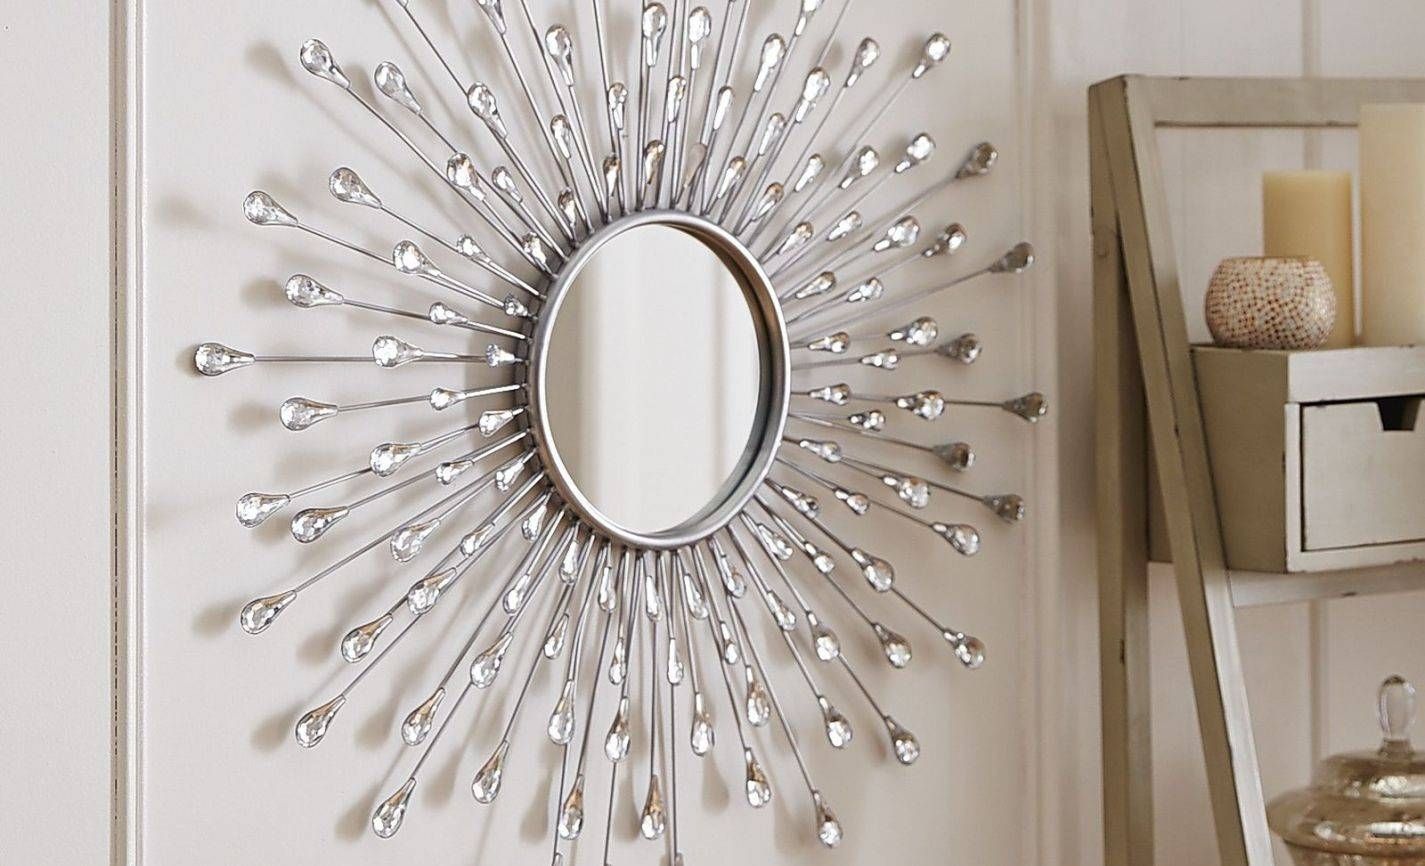 Mirror : Pier 1 Imports Mirrors 47 Stunning Decor With Stunning With Embellished Mirrors (View 4 of 15)